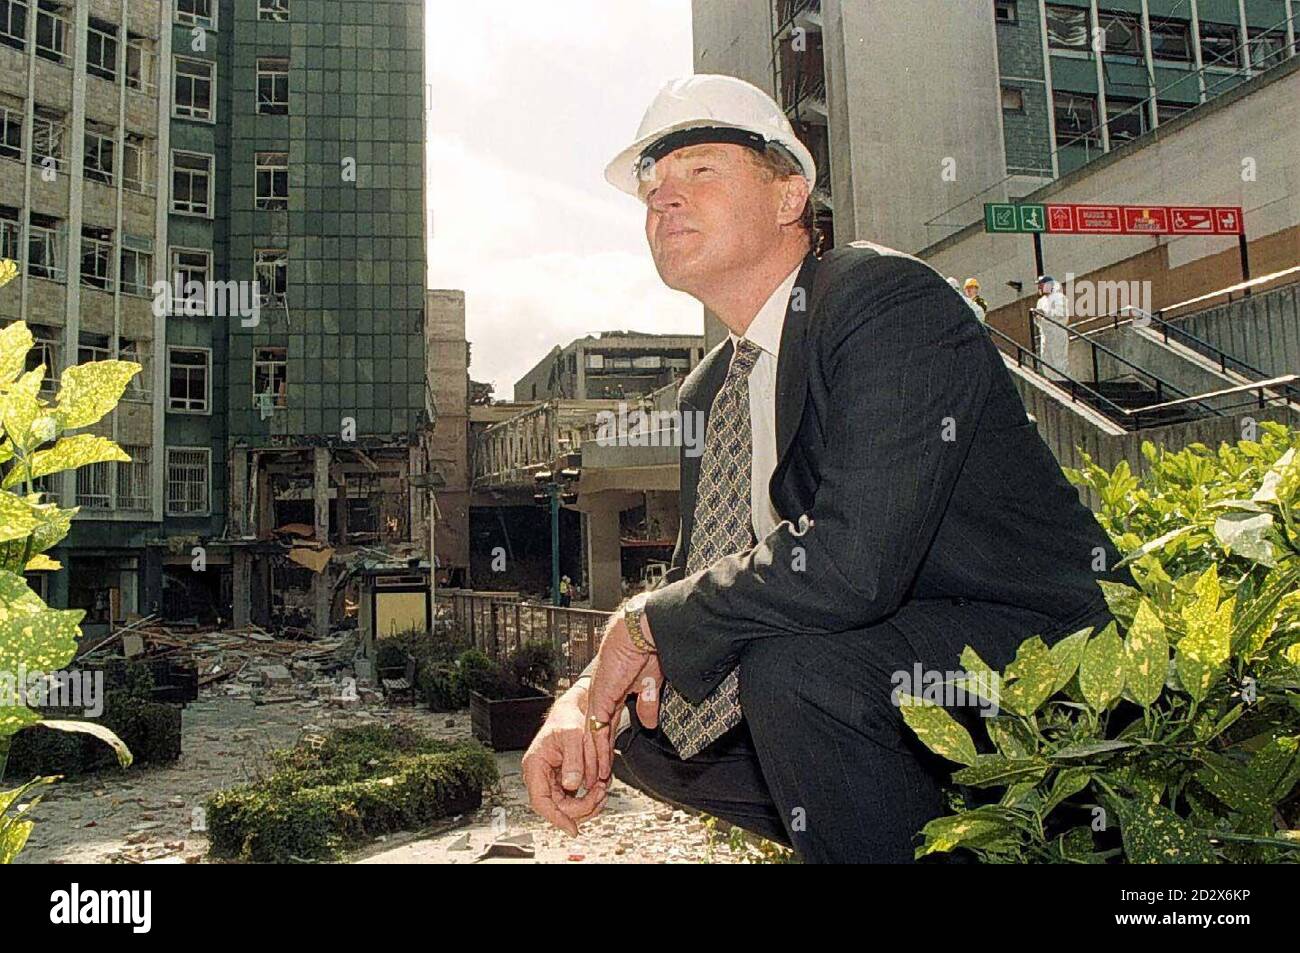 Liberal Democrat leader Paddy Ashdown surveys the damage caused to Manchester city centre by last Saturday's massive IRA bomb. Photo by Brian Williamson/PA/POOL. Stock Photo